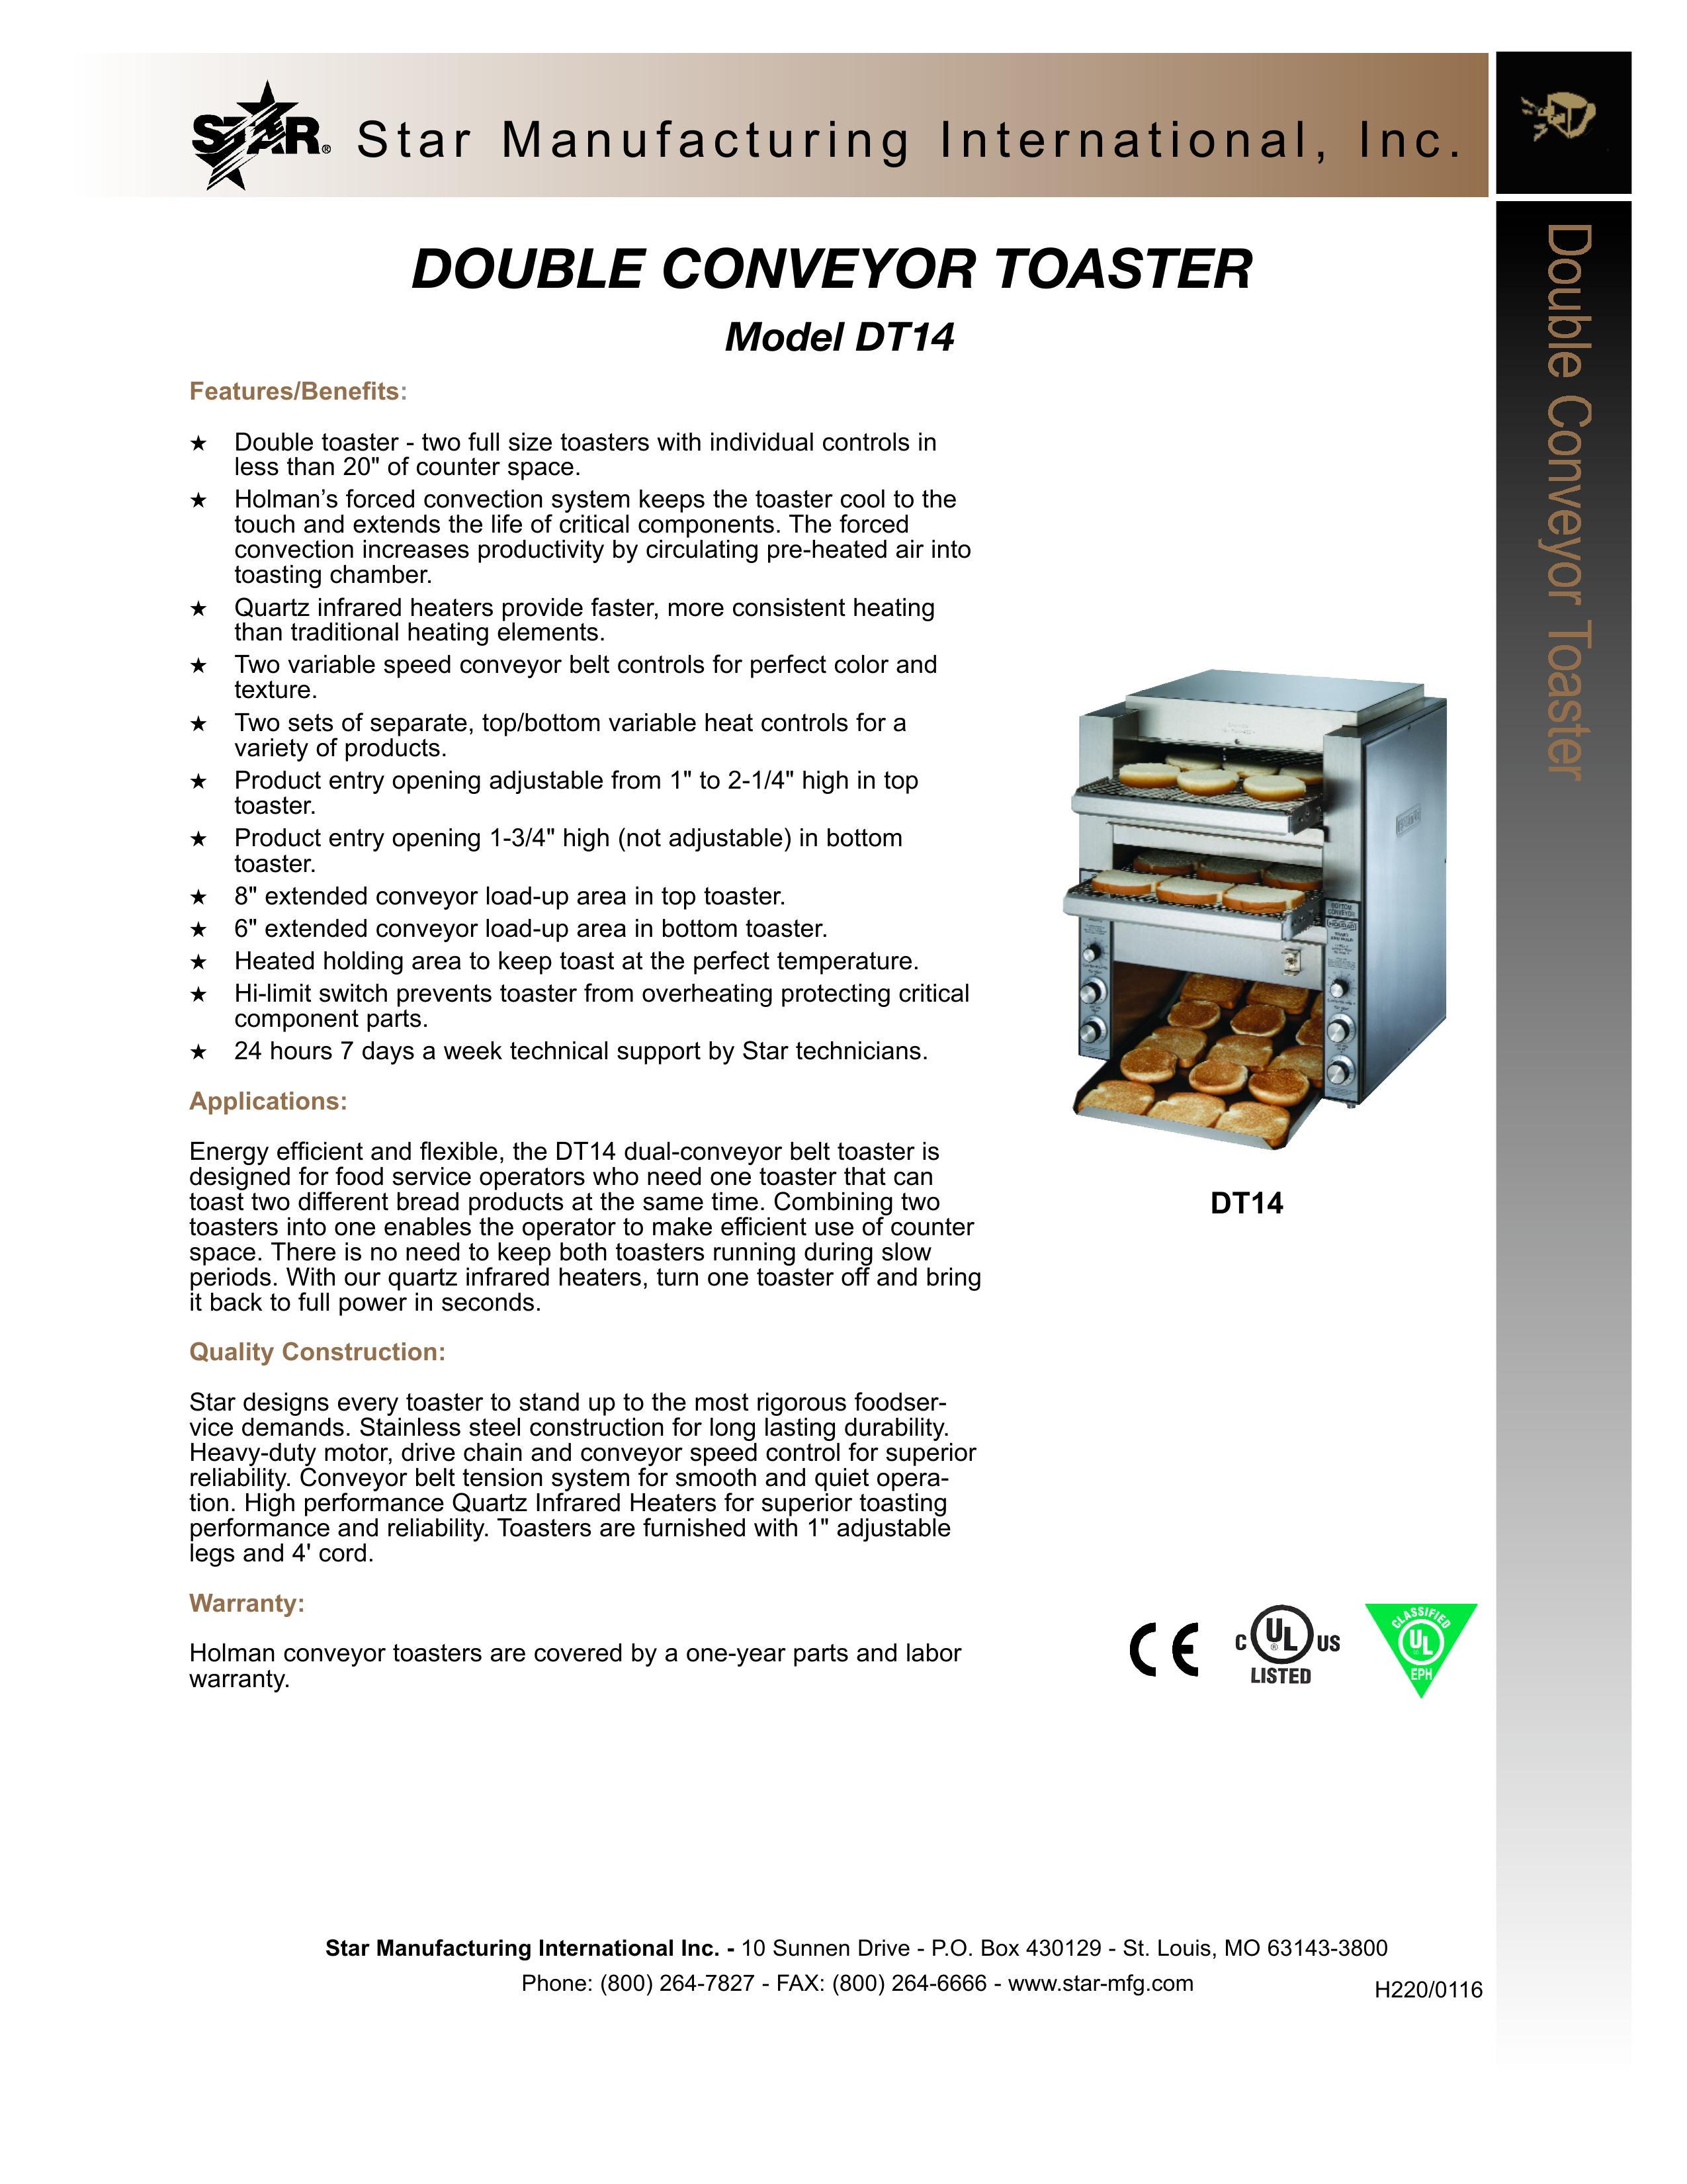 Star Manufacturing DT14 Toaster User Manual